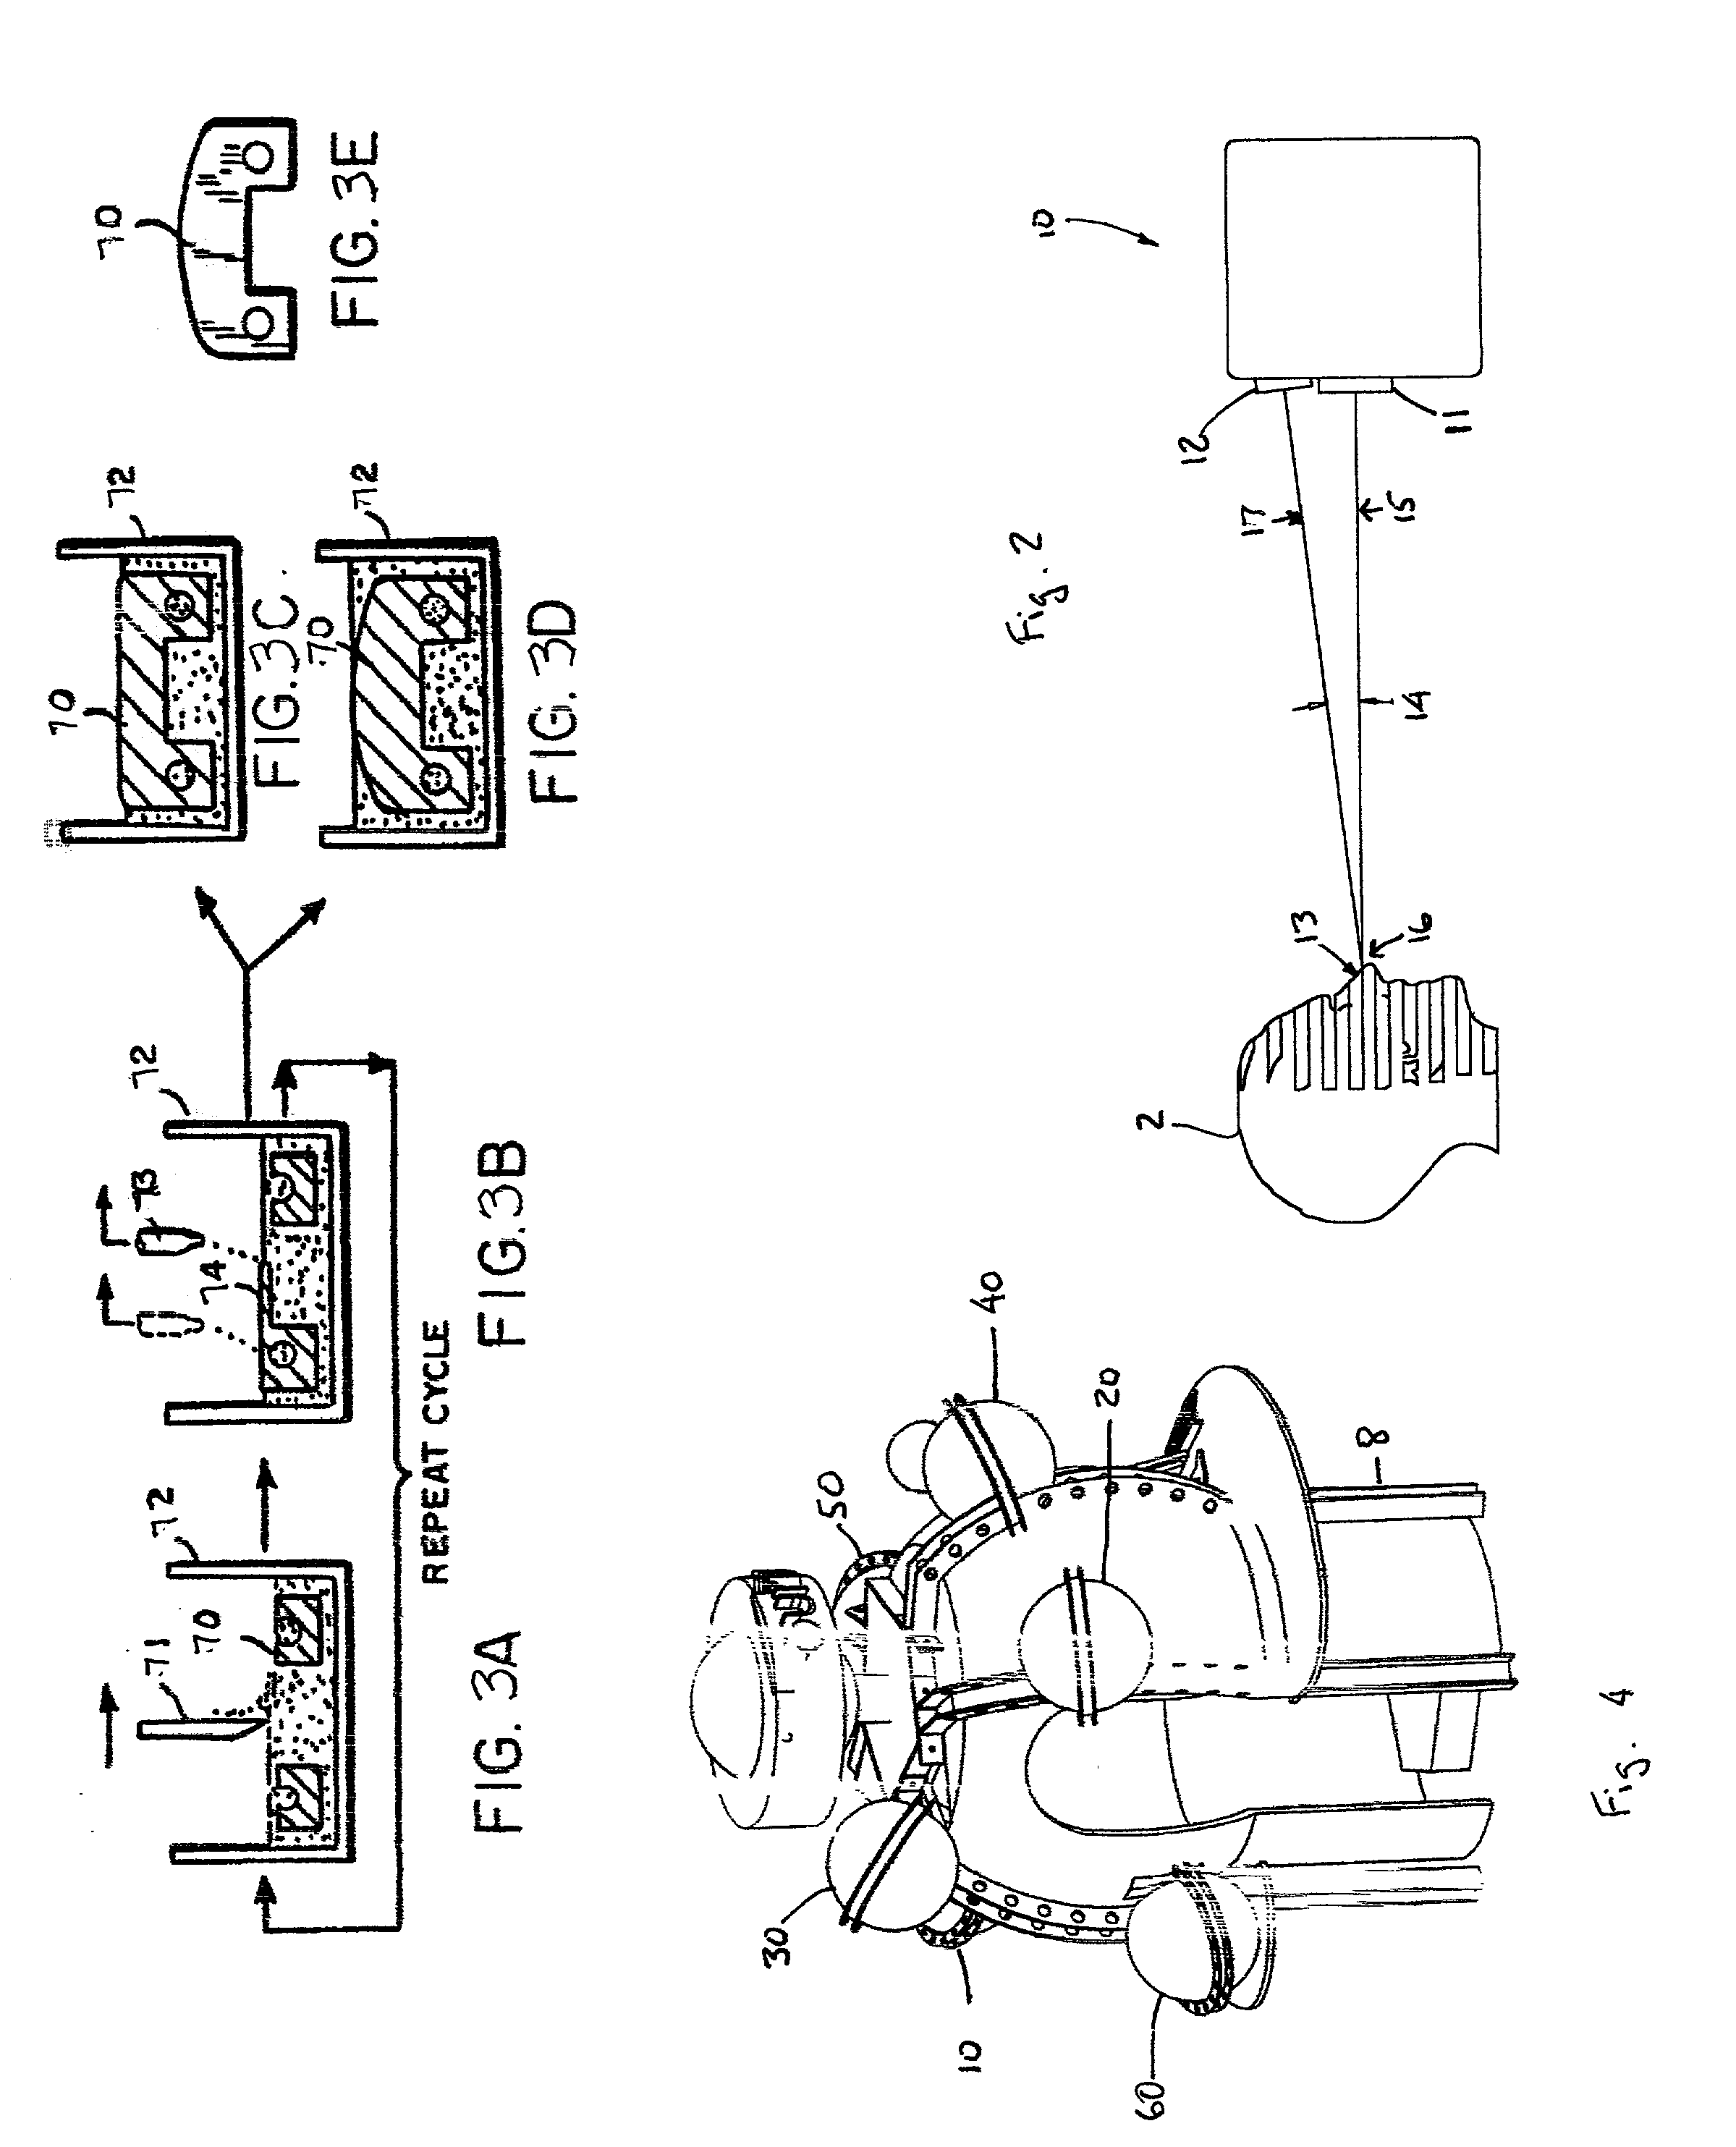 Apparatus and method for three-dimensional scanning of a subject, fabrication of a natural color model therefrom, and the model produced thereby